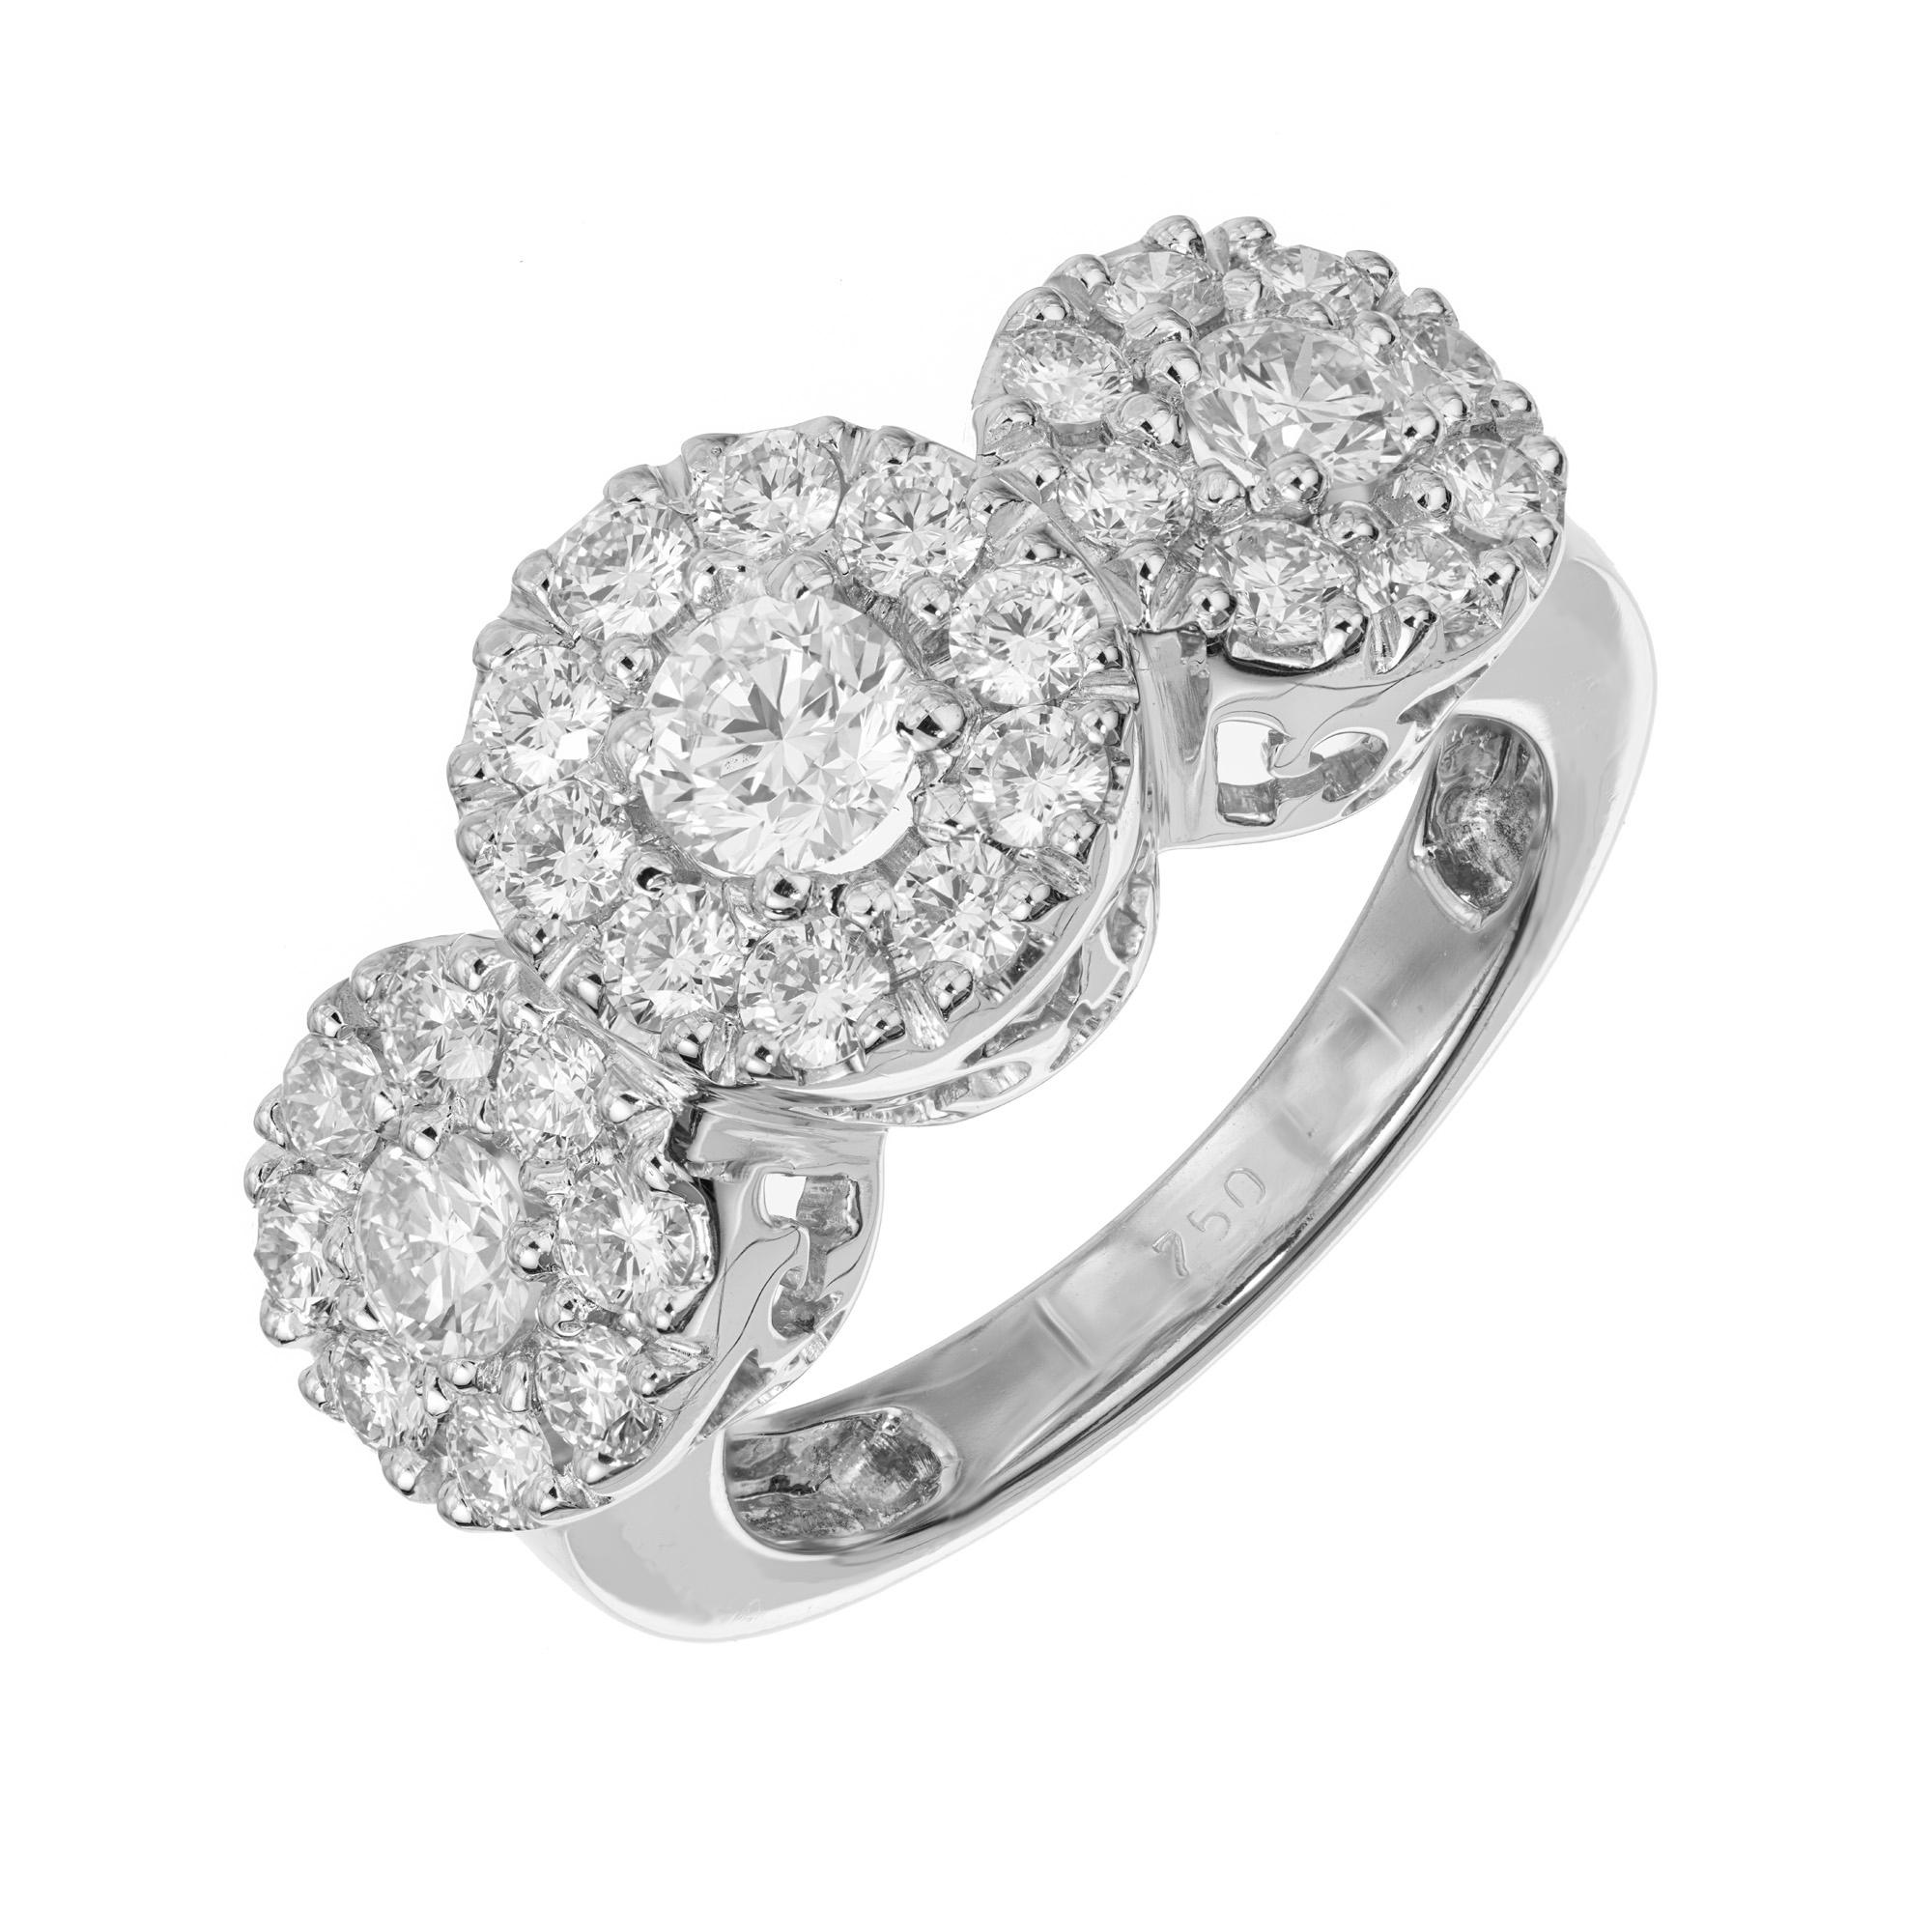 Substantial diamond halo engagement ring. This stunning three section diamond cluster ring consist of 1 round brilliant cut .50cts. diamond center stone accented with 2 round brilliant cut side diamonds totaling .50cts. Set in 18k white gold. Each